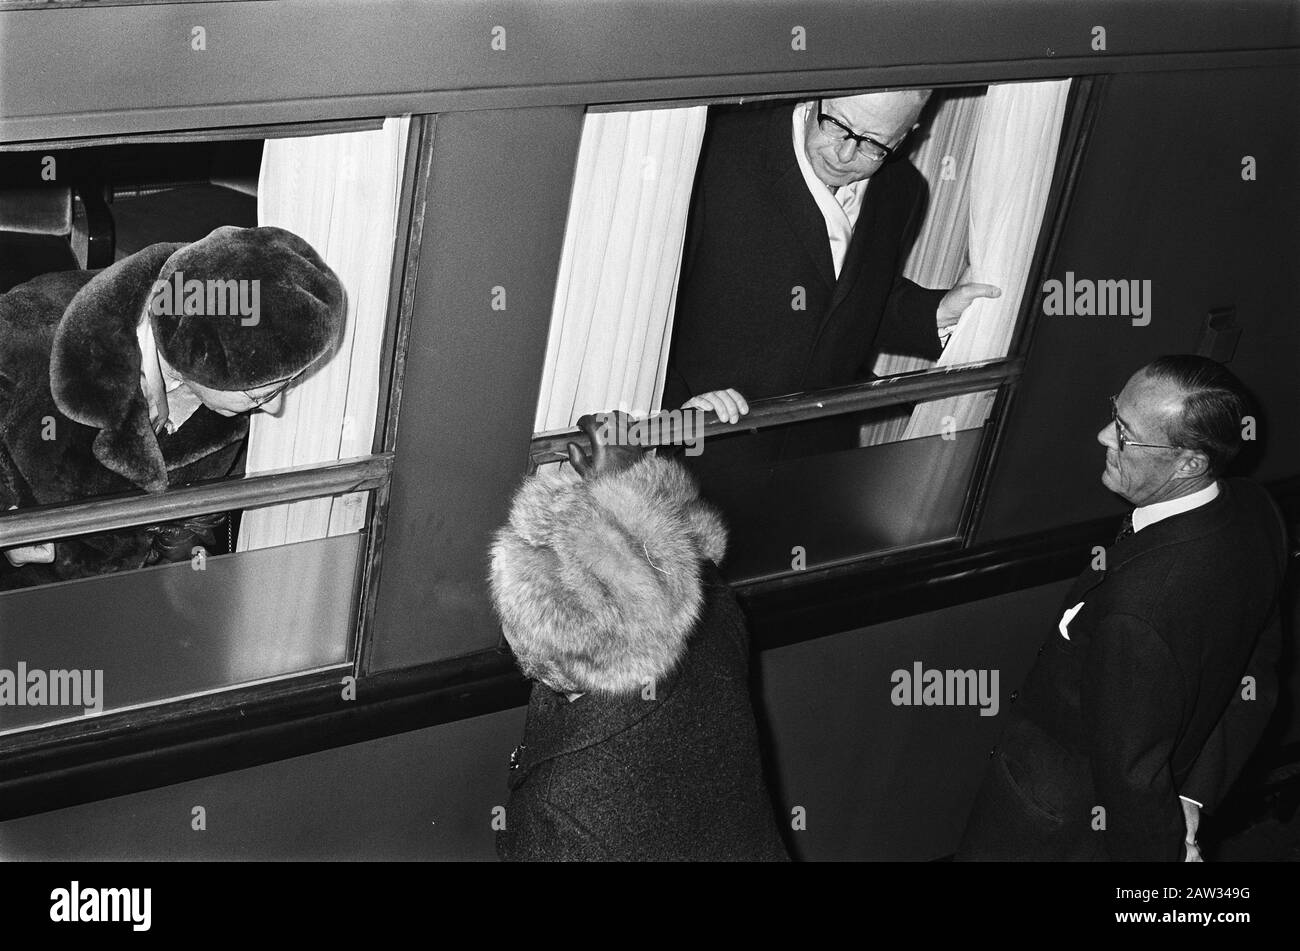 President Heinemann and wife leave CS Adam escorted done by Queen Juliana and Prince Bernhard Date: November 27, 1969 Location: Amsterdam, Noord-Holland Keywords: visit, queens , presidents, leave Person Name: Heidemann, Gustav, Juliana (queen Netherlands) Stock Photo